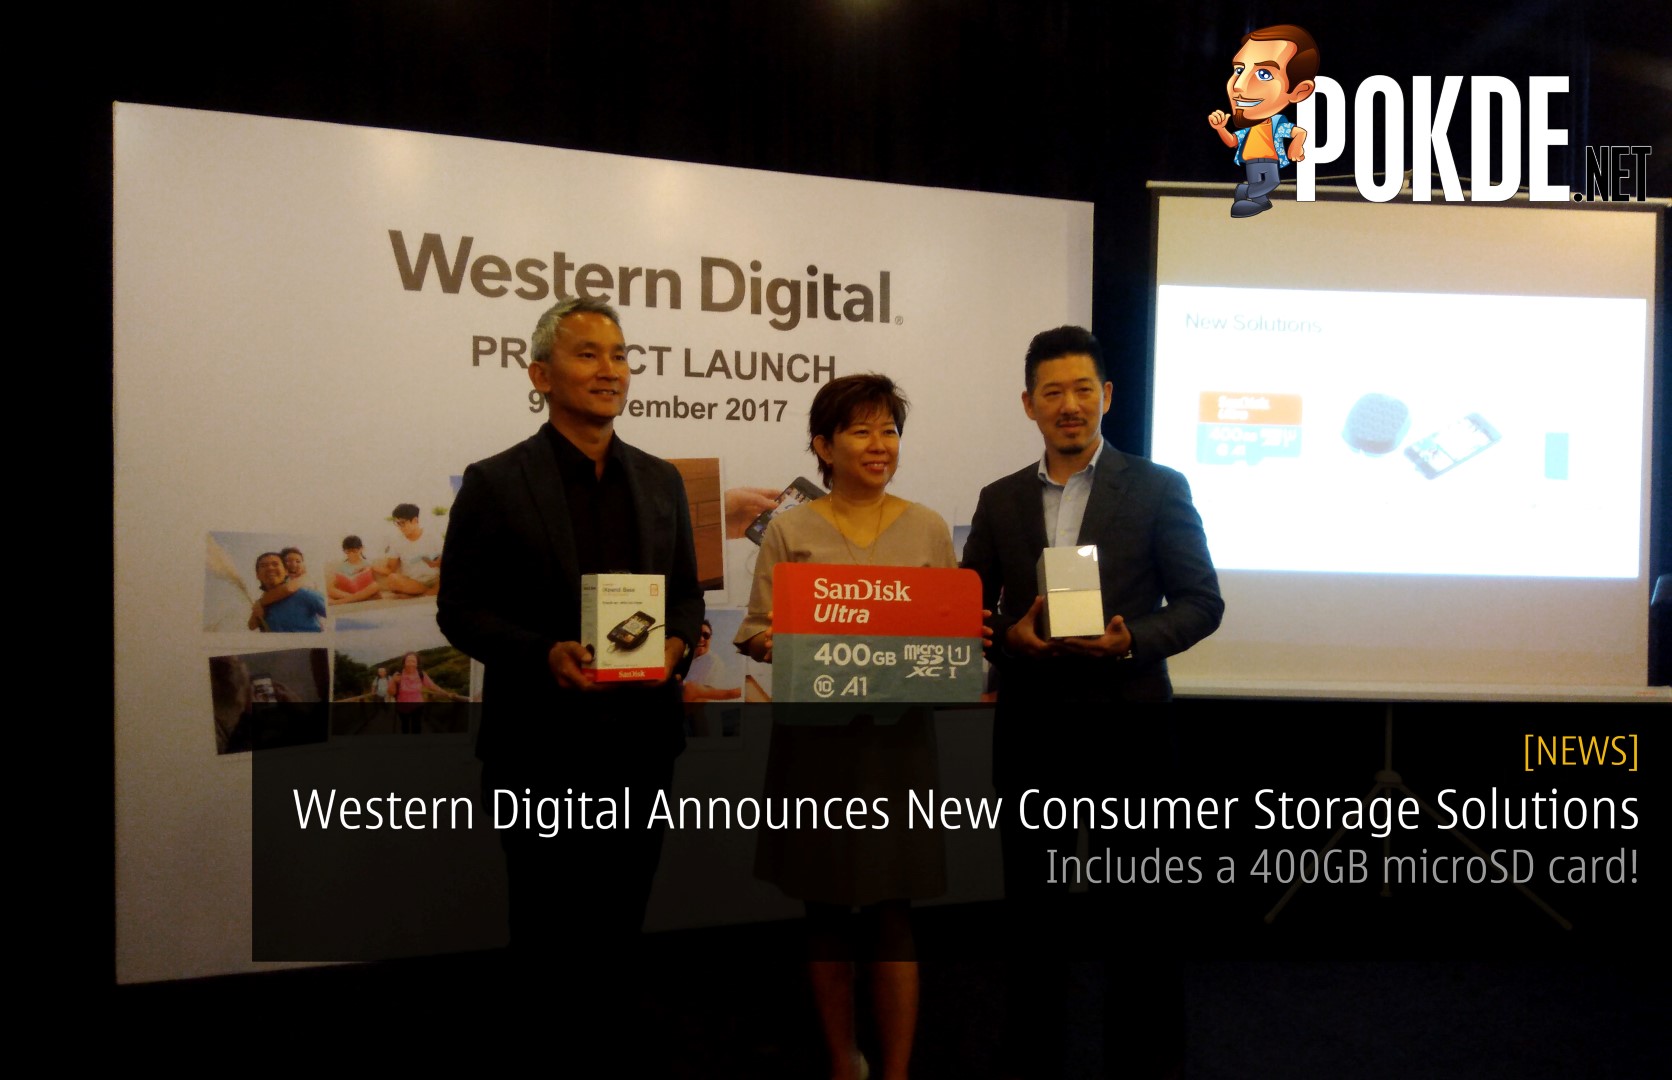 Western Digital Announces New Consumer Storage Solutions - Includes a 400GB microSD card! 31